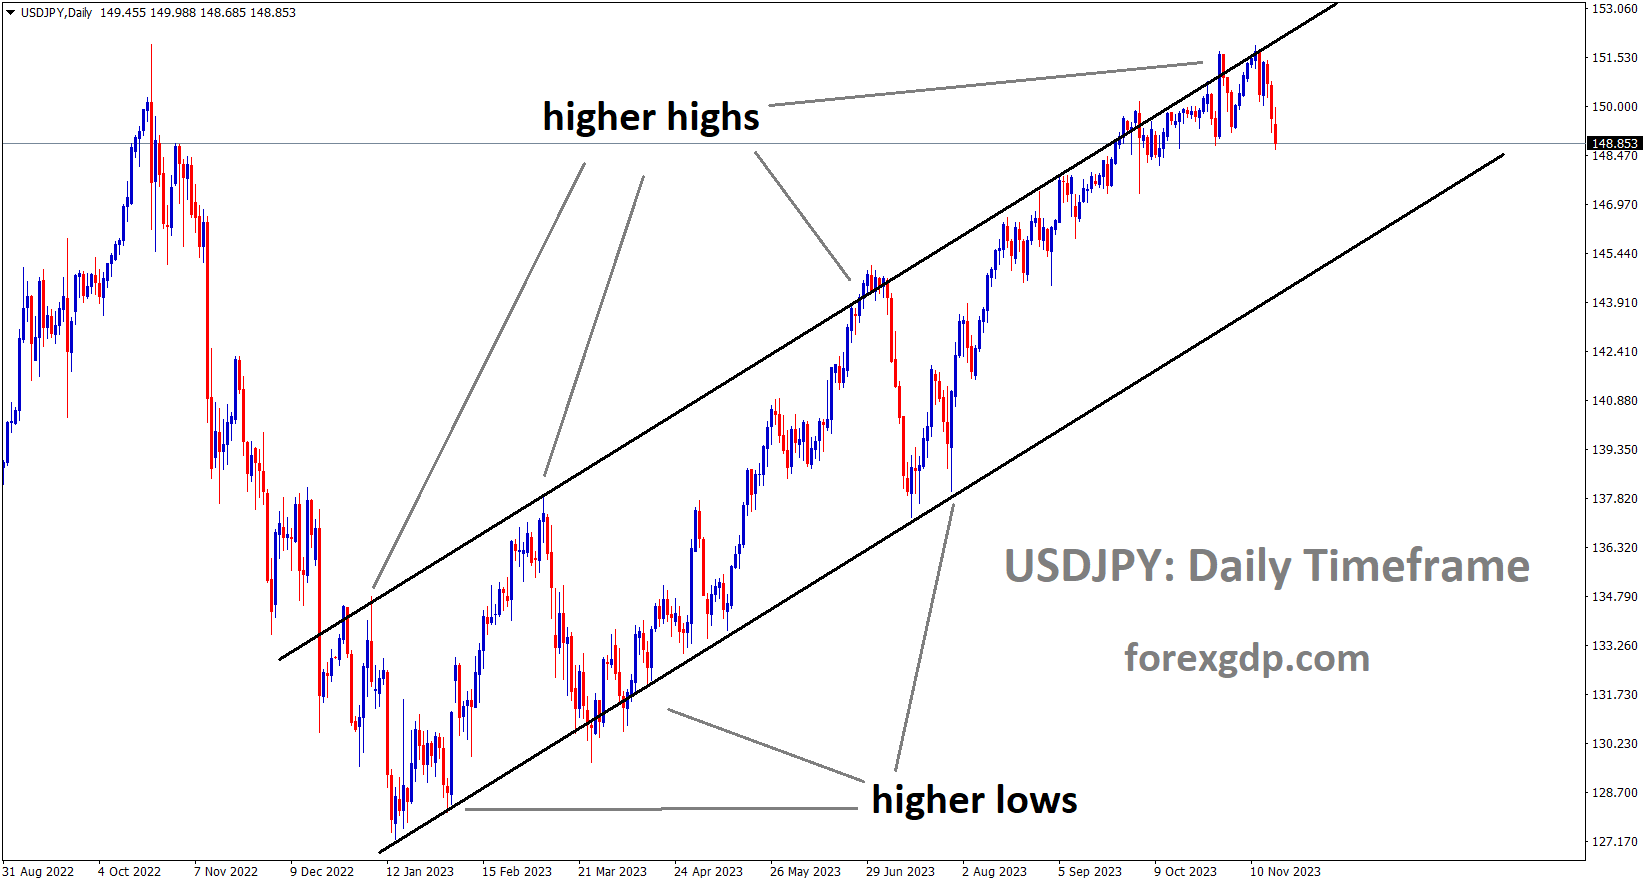 USDJPY is moving in an Ascending channel and the market has fallen from the higher high area of the channel